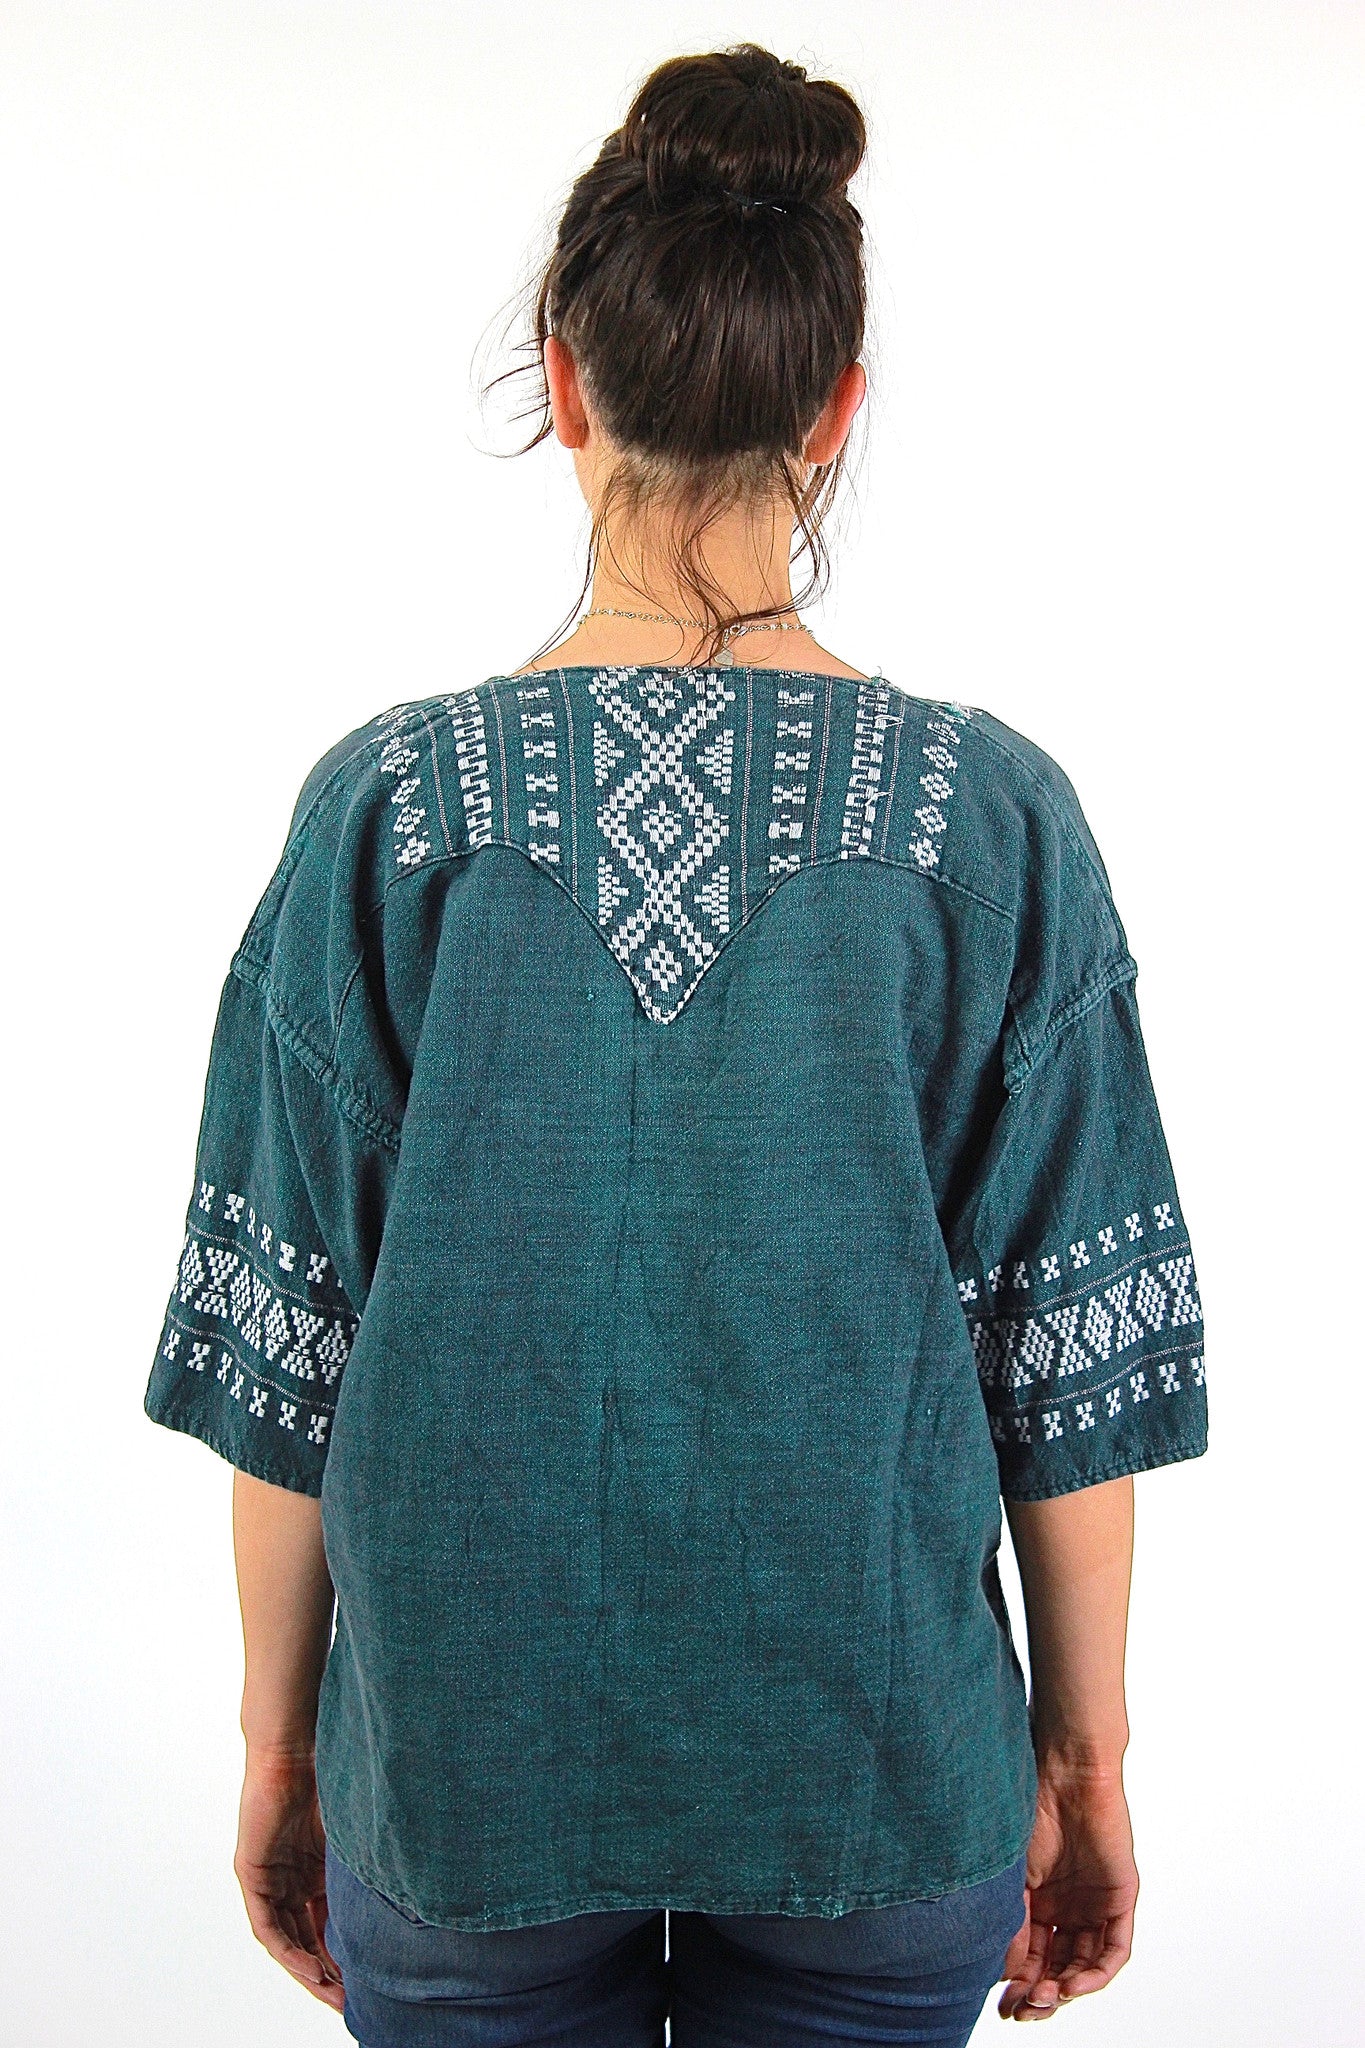 Vintage 70s mexican embroidered shirt tunic top - shabbybabe